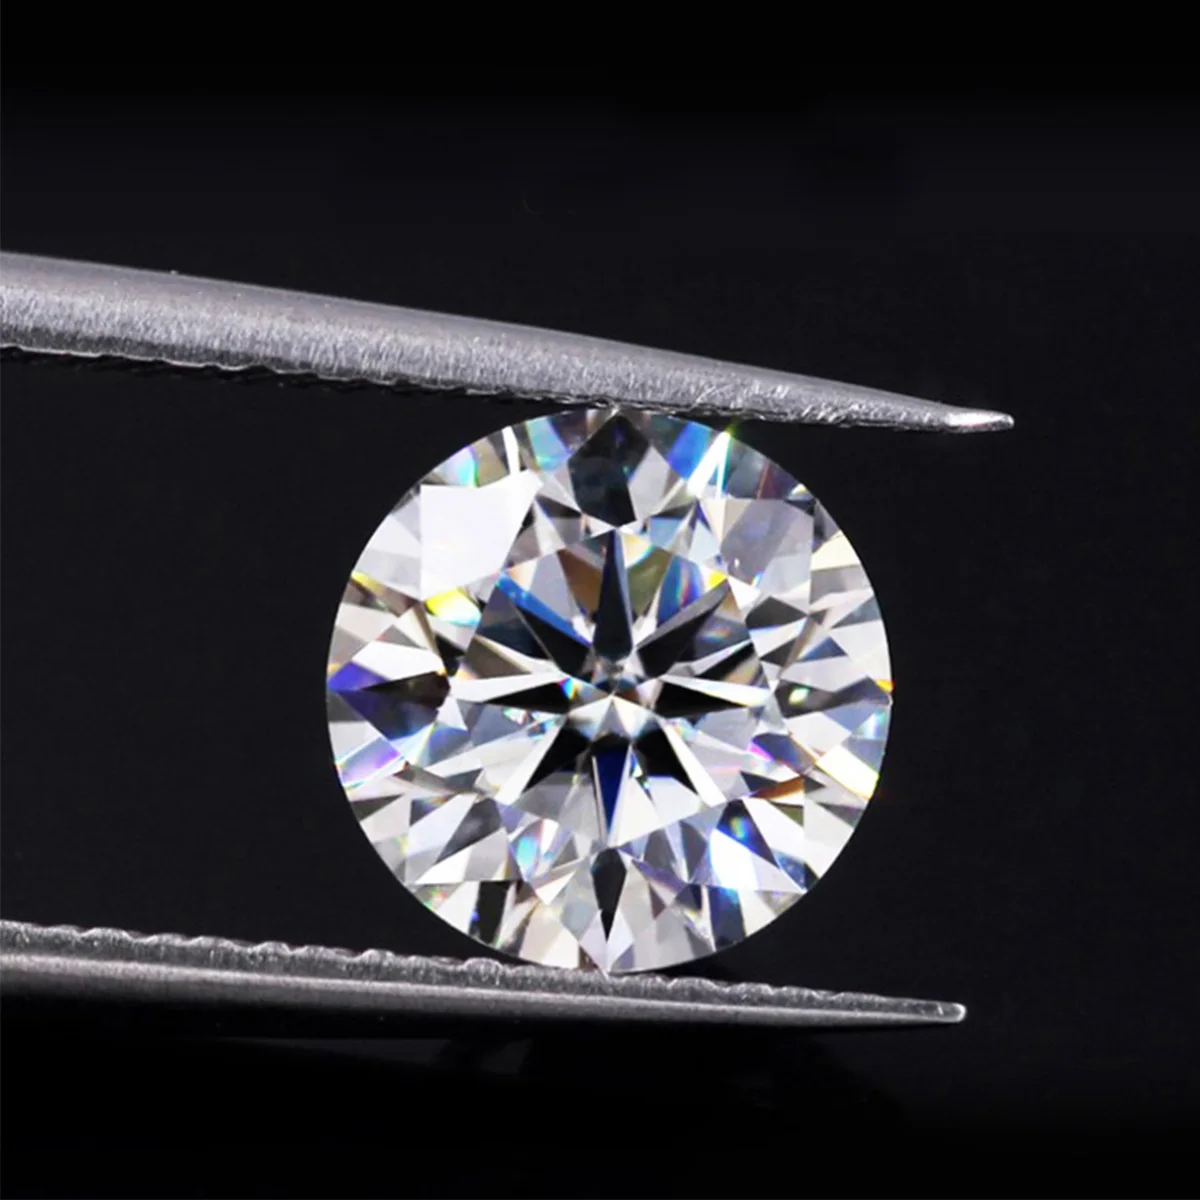 

Real 100% Loose Gemstones Moissanite Stone 1ct To 10ct G Color Lab Grown Diamond For Jewelry Material With GRA Certificate, Clear